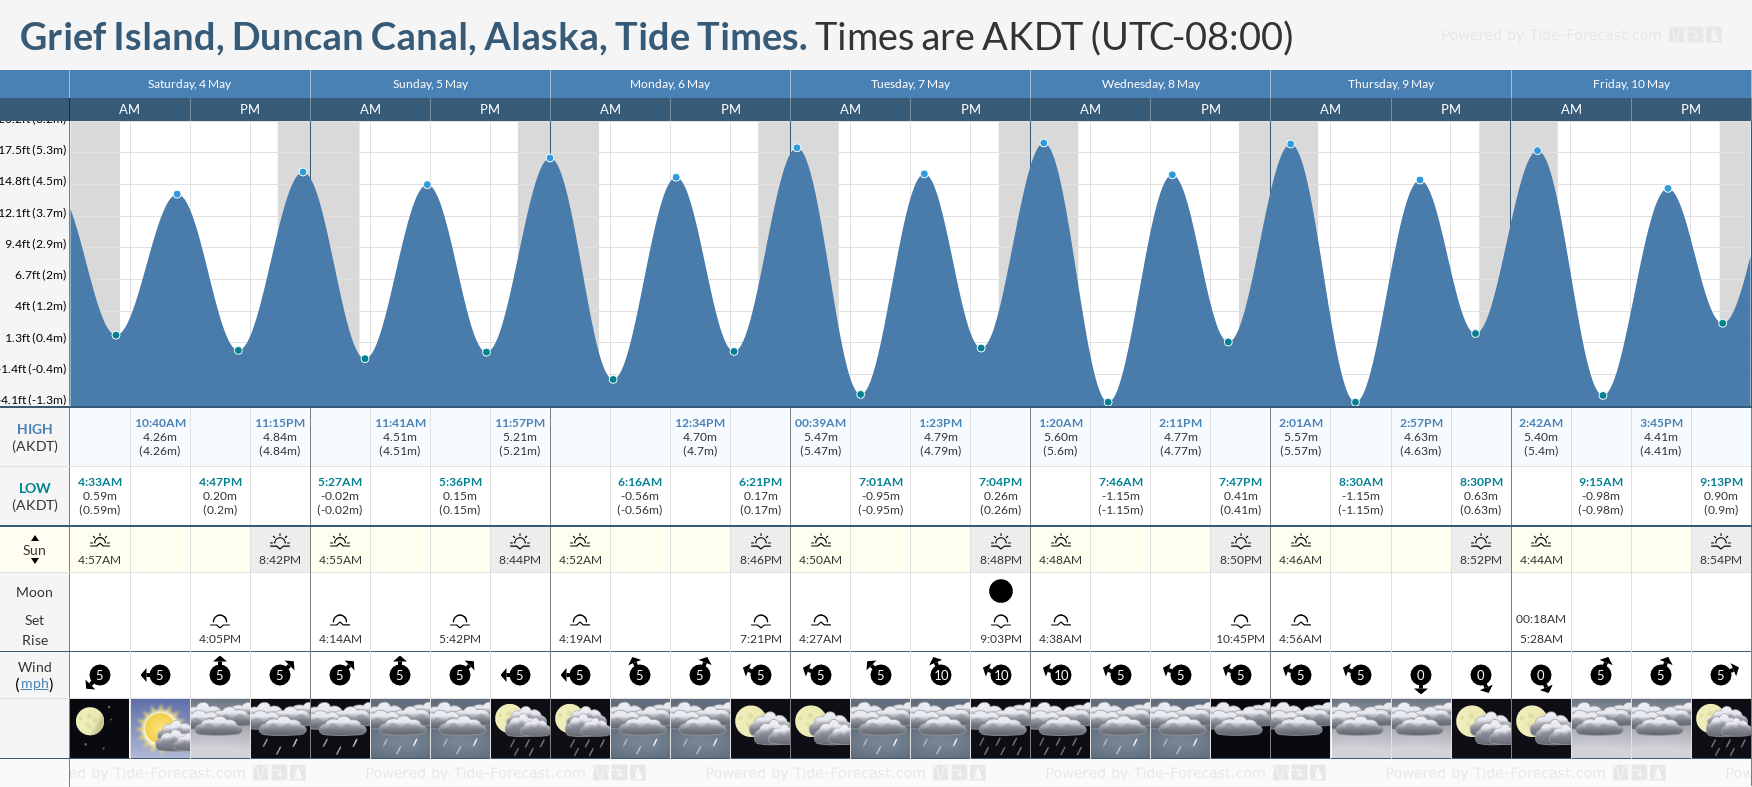 Grief Island, Duncan Canal, Alaska Tide Chart including high and low tide tide times for the next 7 days